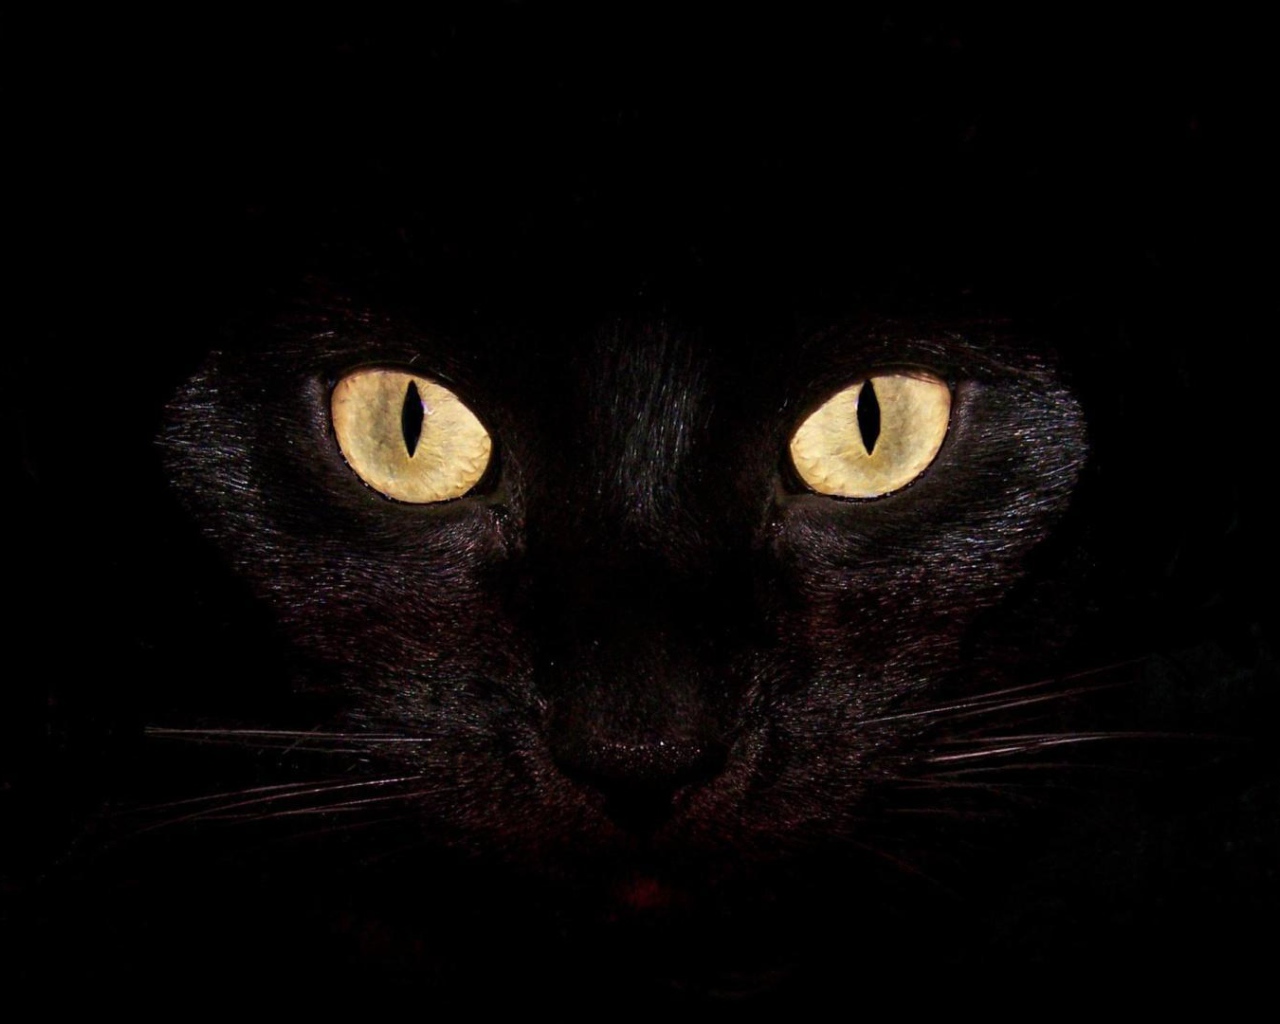 Black cat with yellow eyes on black background